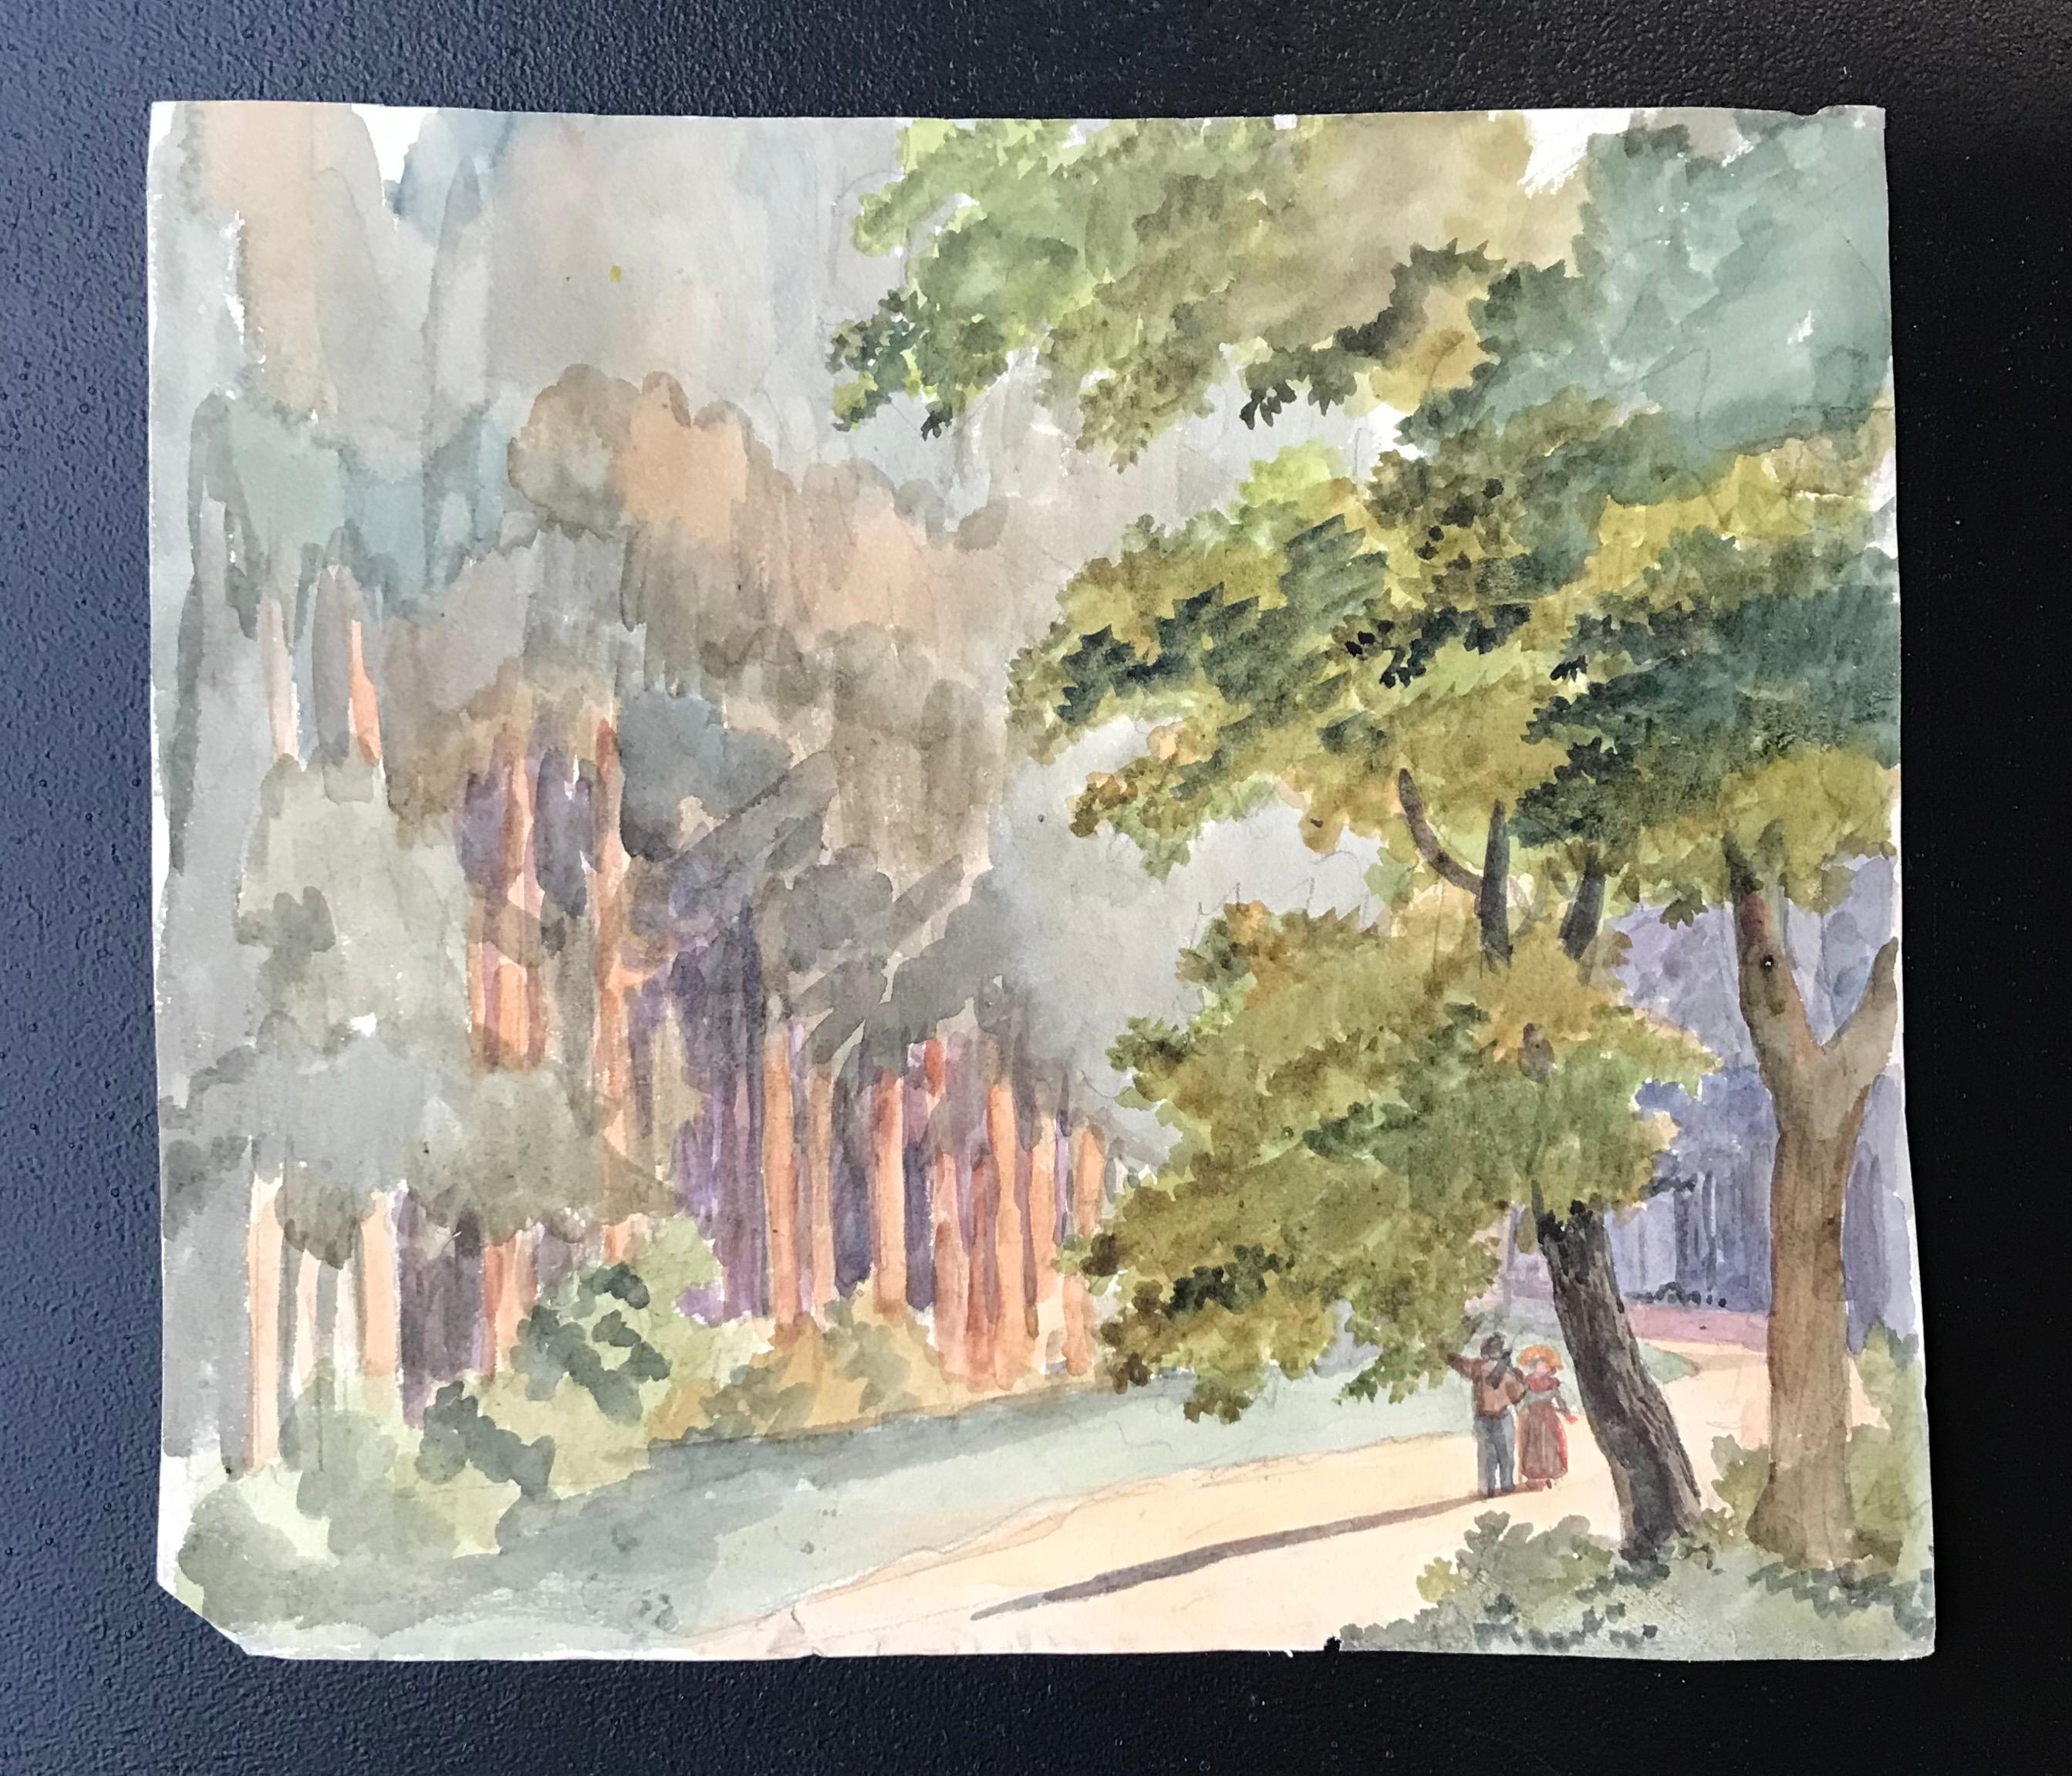 Walk in a park - Watercolor on paper 18x20 cm - Painting by Unknown